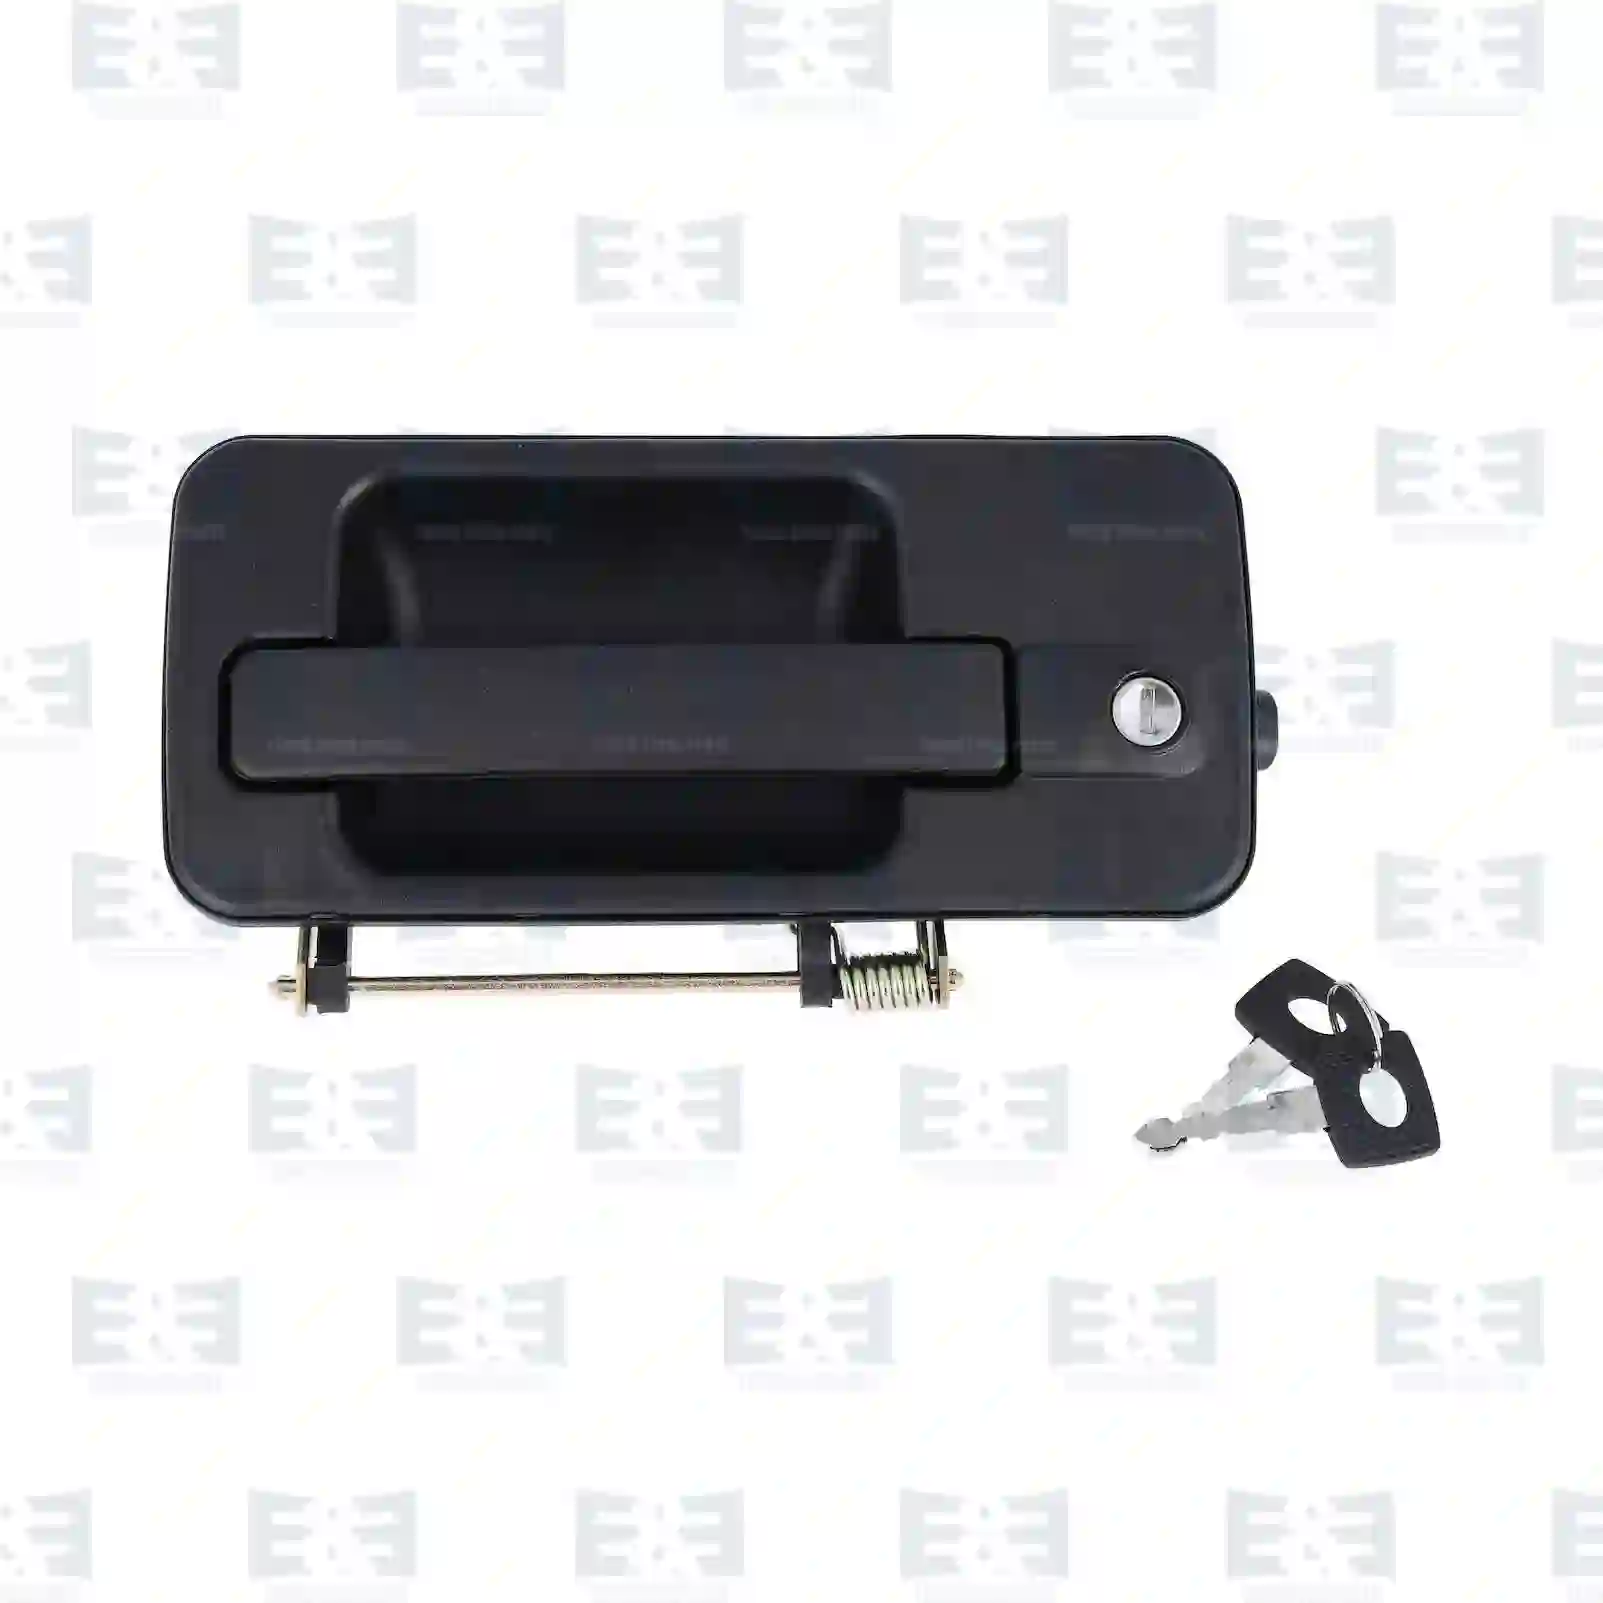 Door handle, left, complete with lock cylinder, 2E2292158, 9417600459S, ZG60579-0008 ||  2E2292158 E&E Truck Spare Parts | Truck Spare Parts, Auotomotive Spare Parts Door handle, left, complete with lock cylinder, 2E2292158, 9417600459S, ZG60579-0008 ||  2E2292158 E&E Truck Spare Parts | Truck Spare Parts, Auotomotive Spare Parts